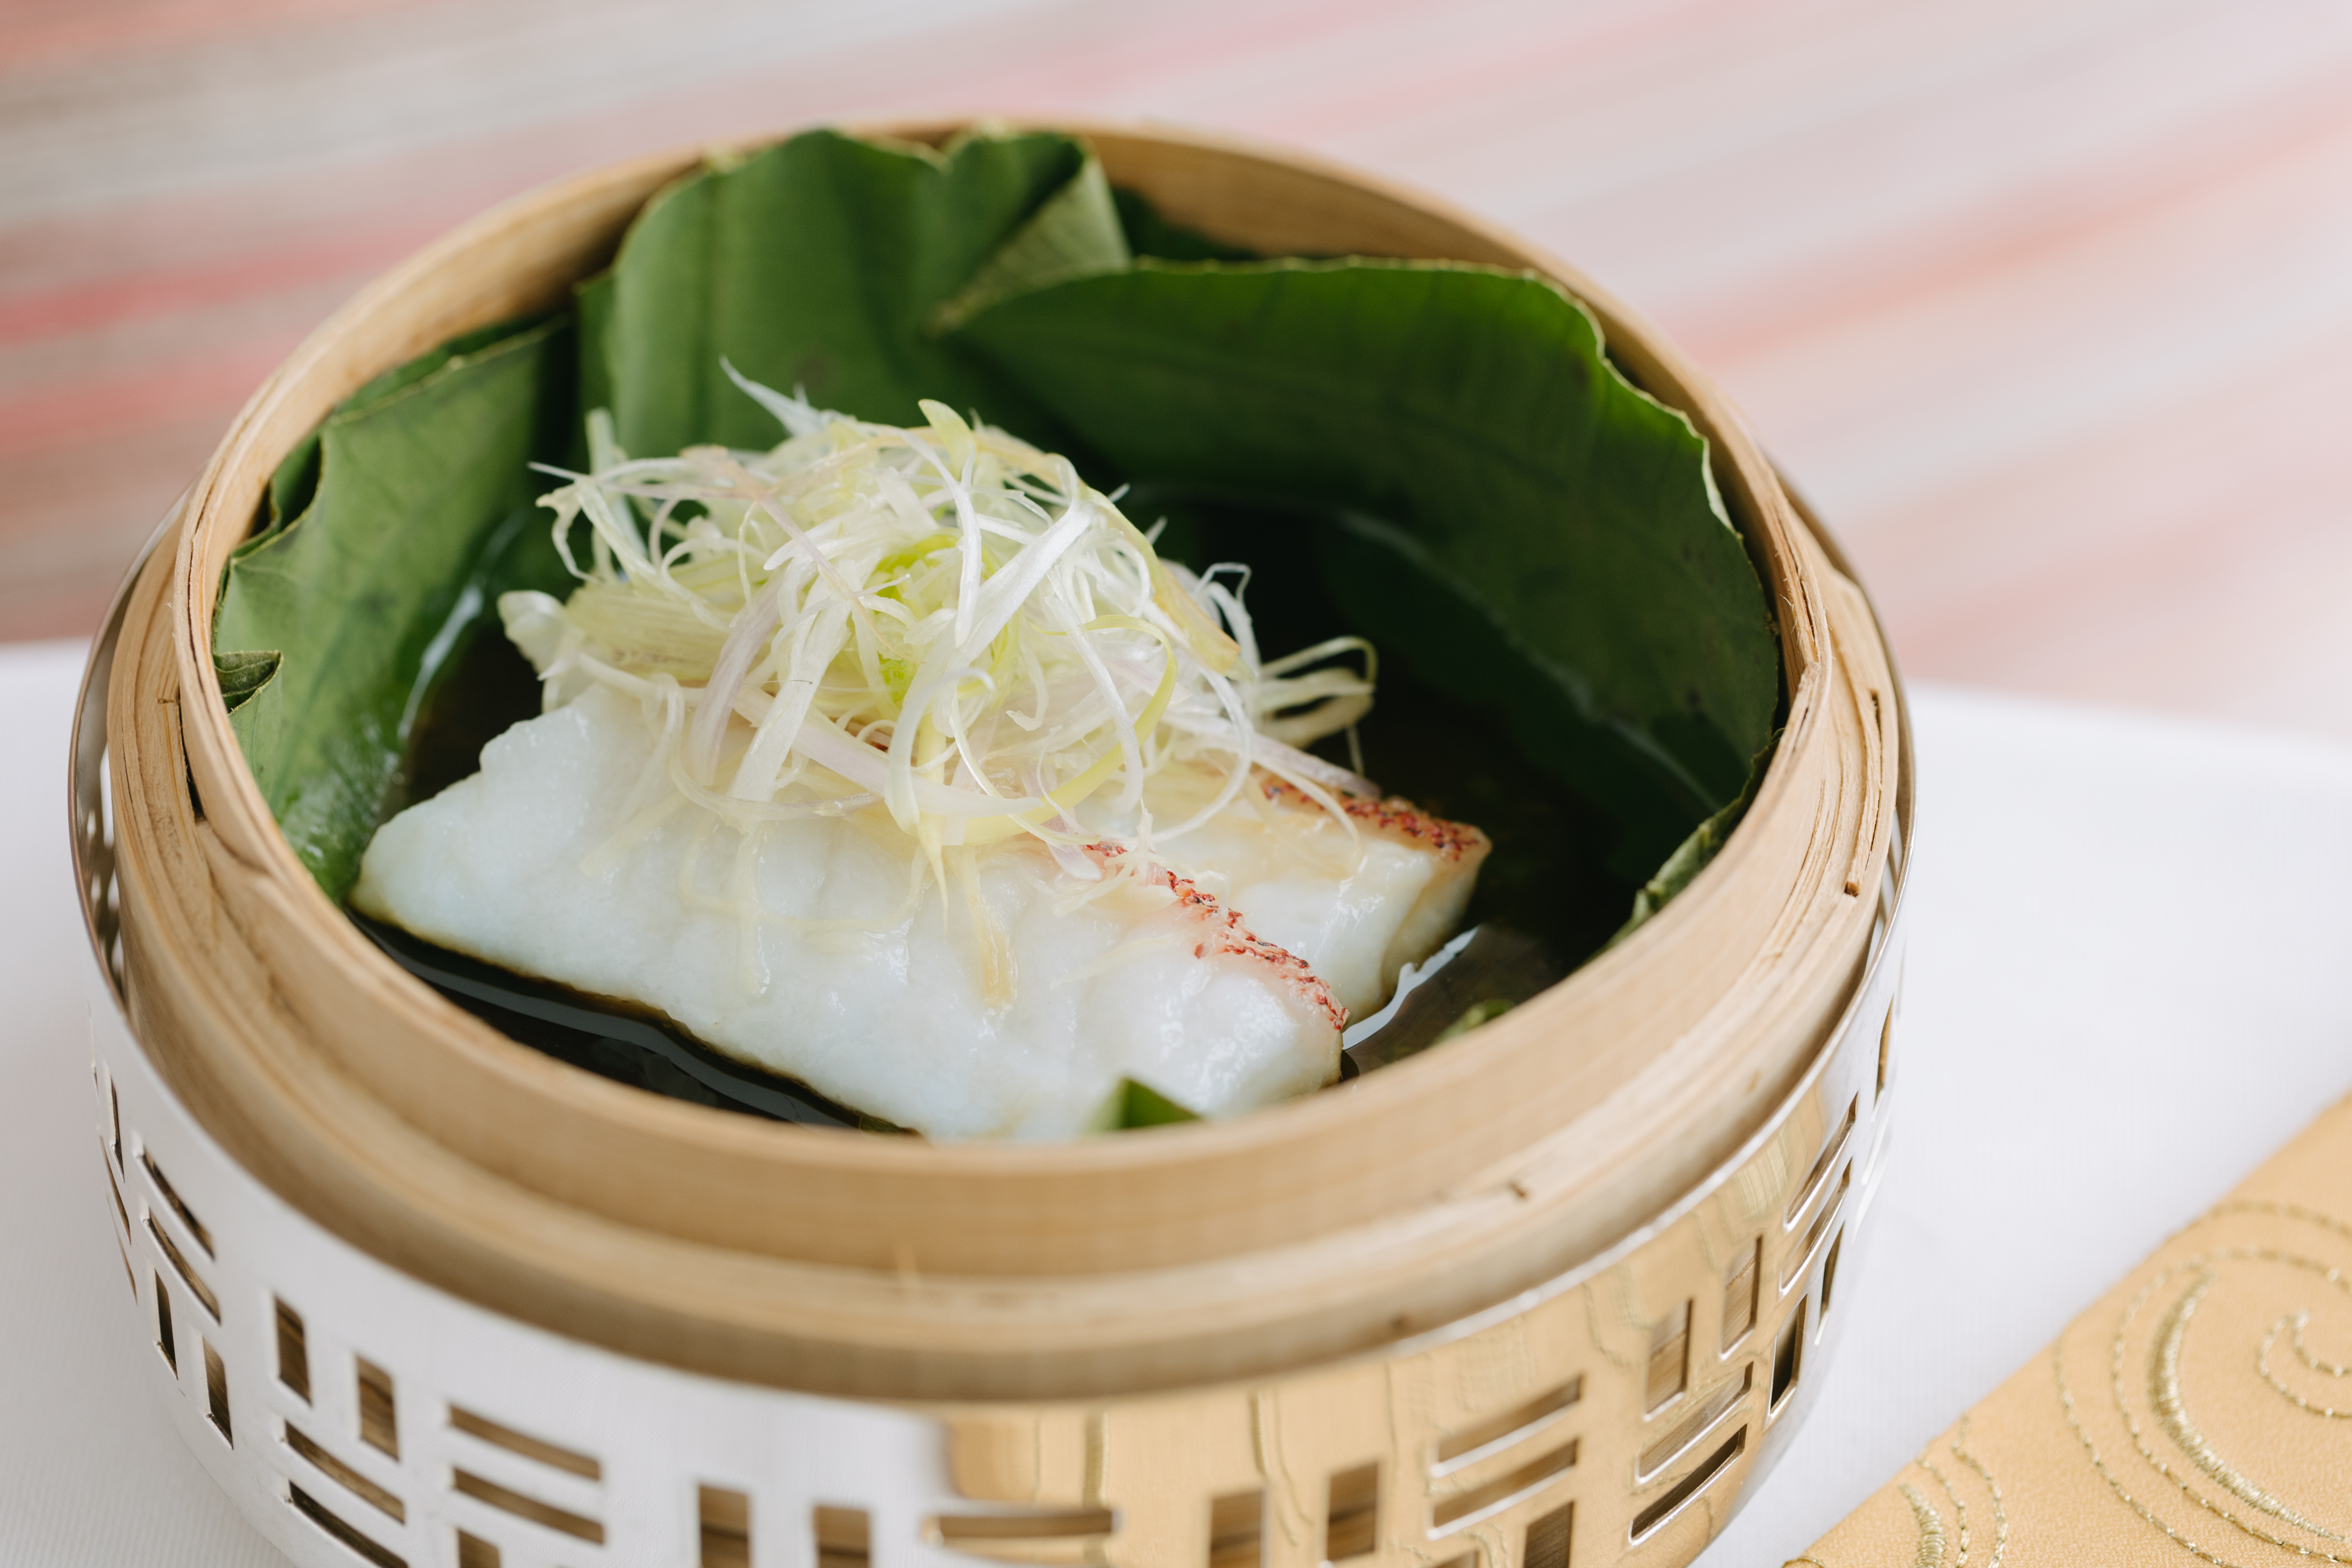 Lung King Heen_Steamed Star Garoupa Fillet with Ginger and Spring Onions in Bamboo Basket 籠仔薑蔥蒸星班柳.jpg